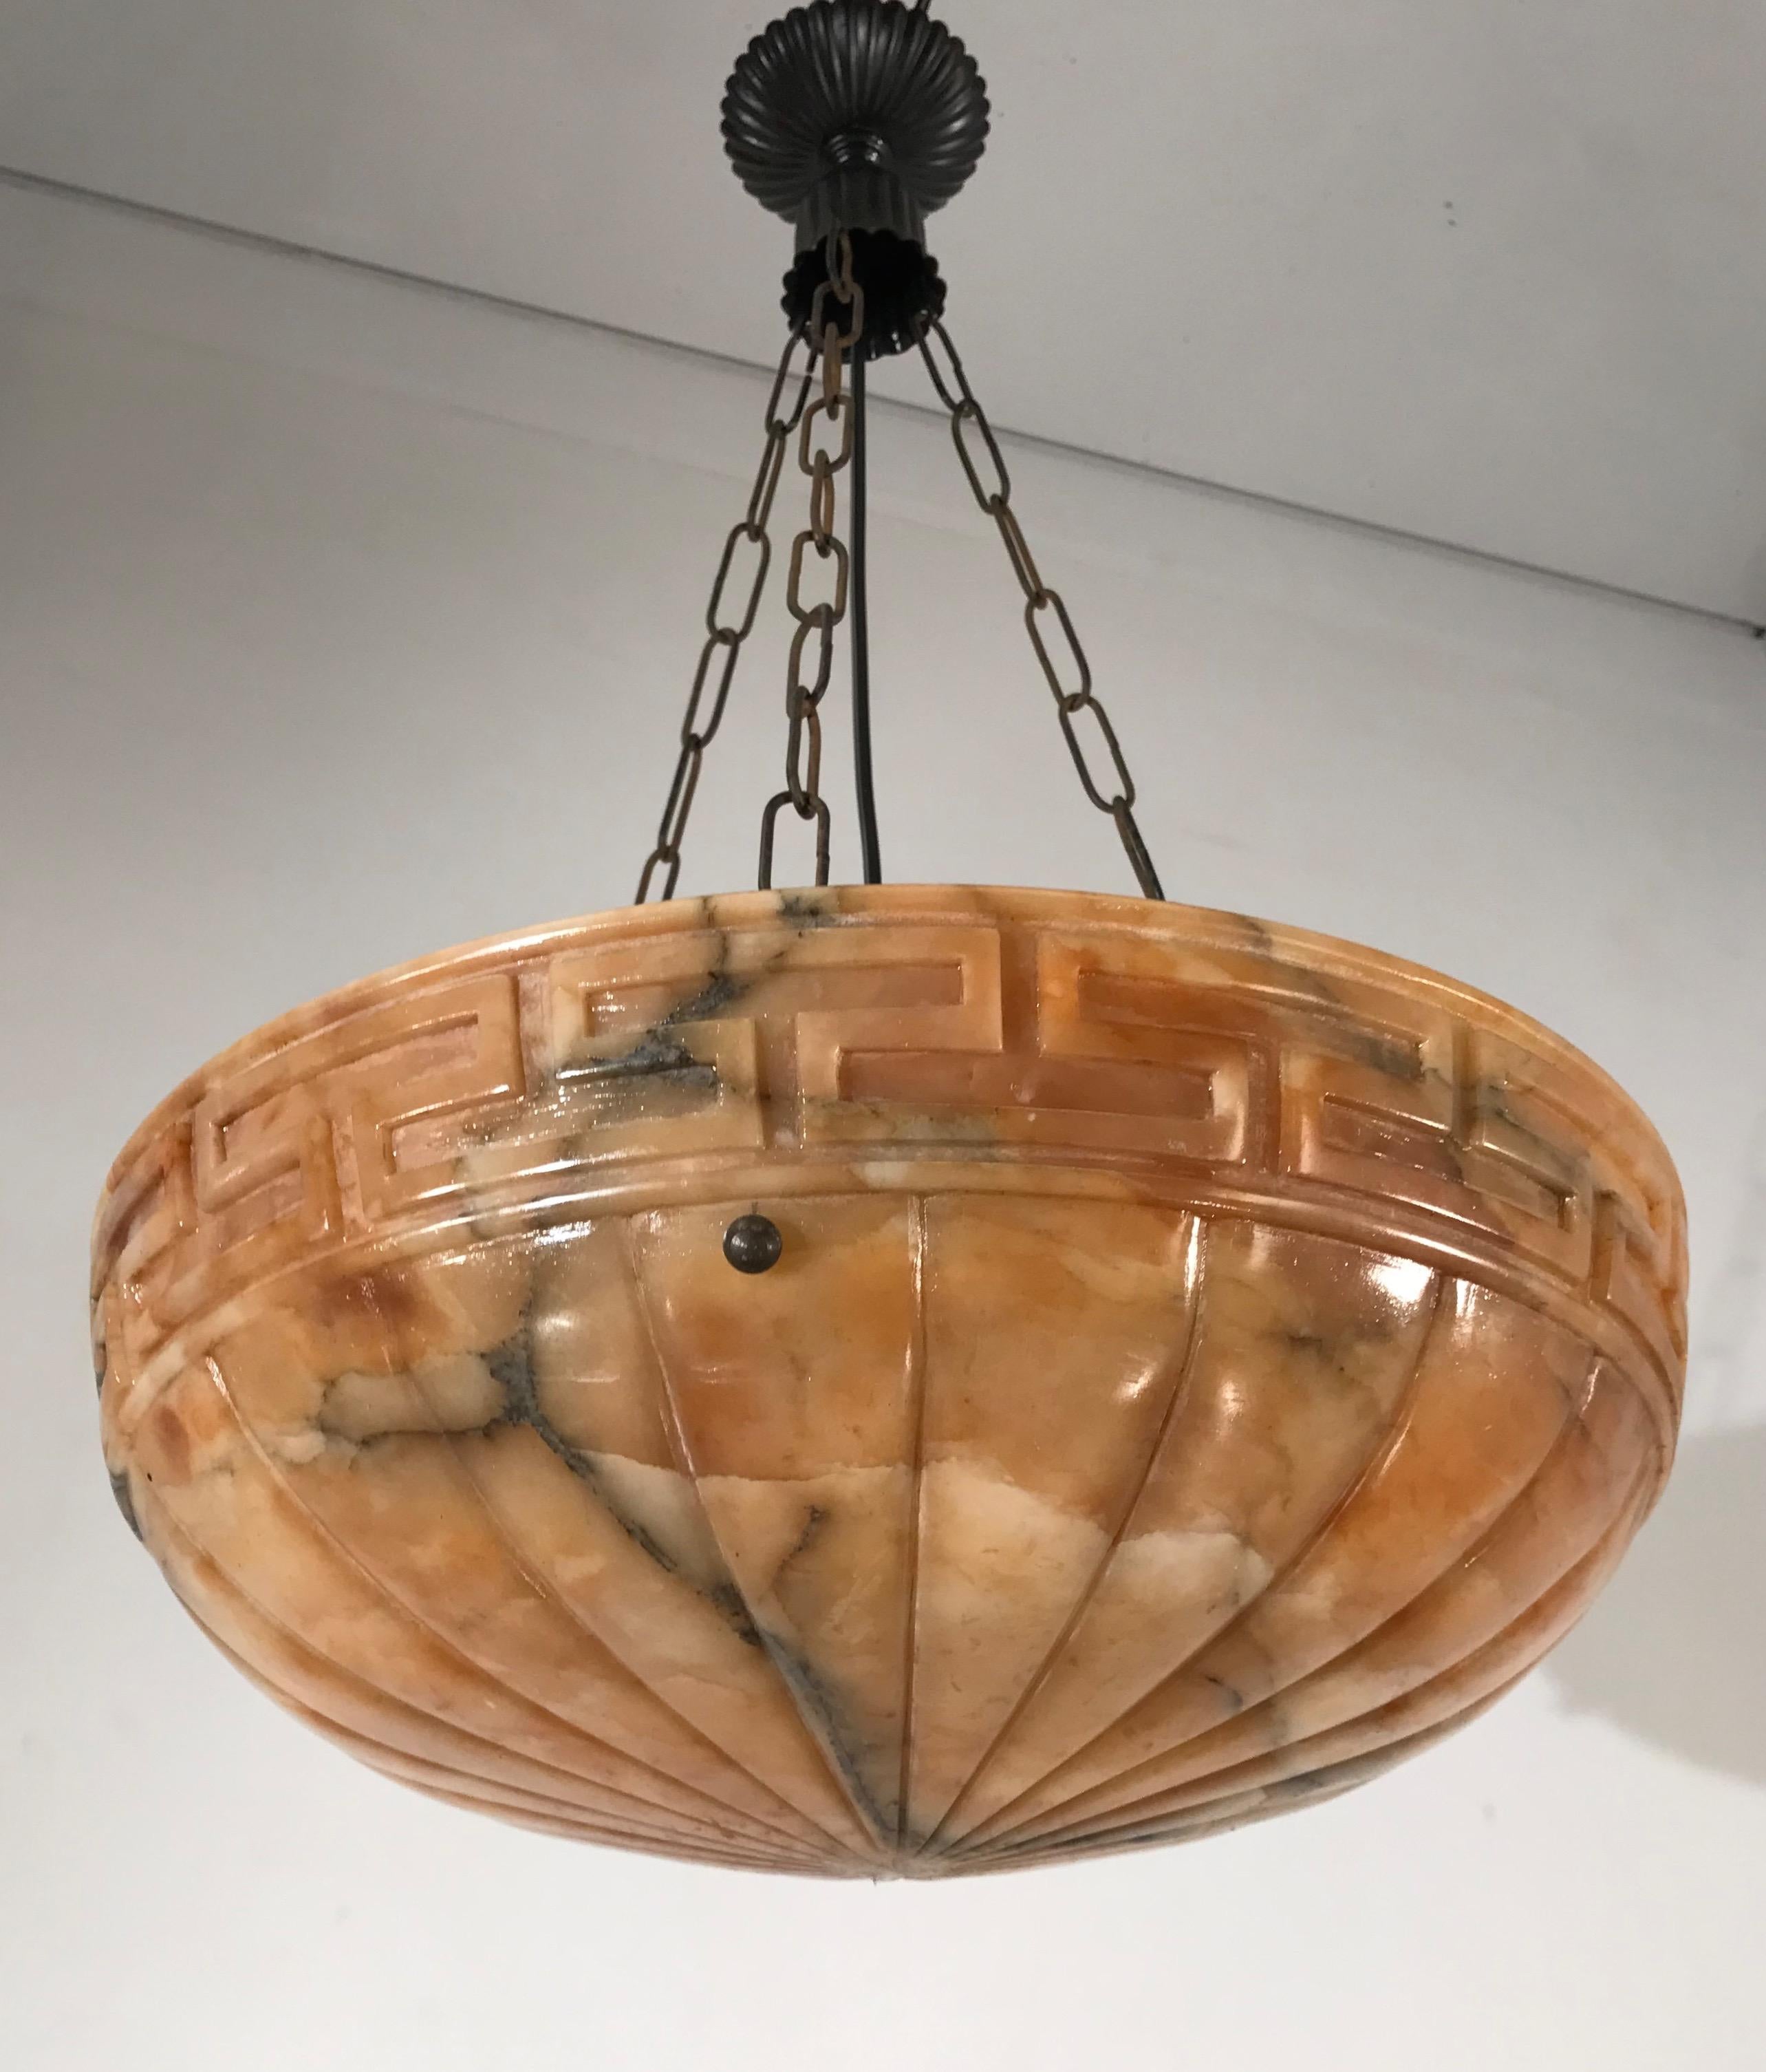 Beautiful design and wonderful light creating, mineral stone pendant.

This marvelous, early 20th century alabaster pendant is hanging from a perfect chain and canopy. The shape, the color and the effect of the beautifully flowing black veins in the